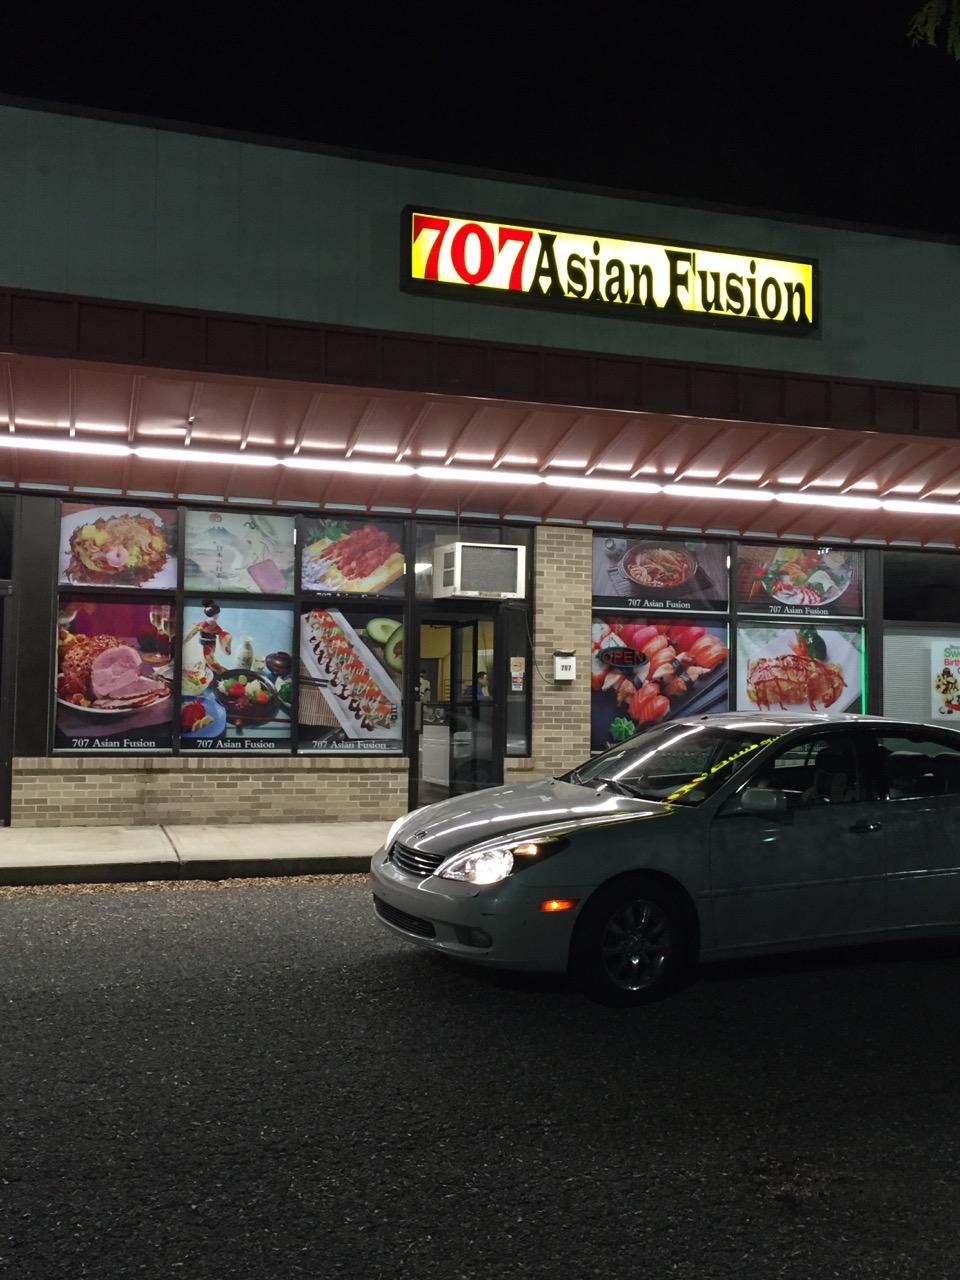 707 Asian Fusion | 707 Winsted Rd, Torrington, CT 06790 | Phone: (860) 618-7999